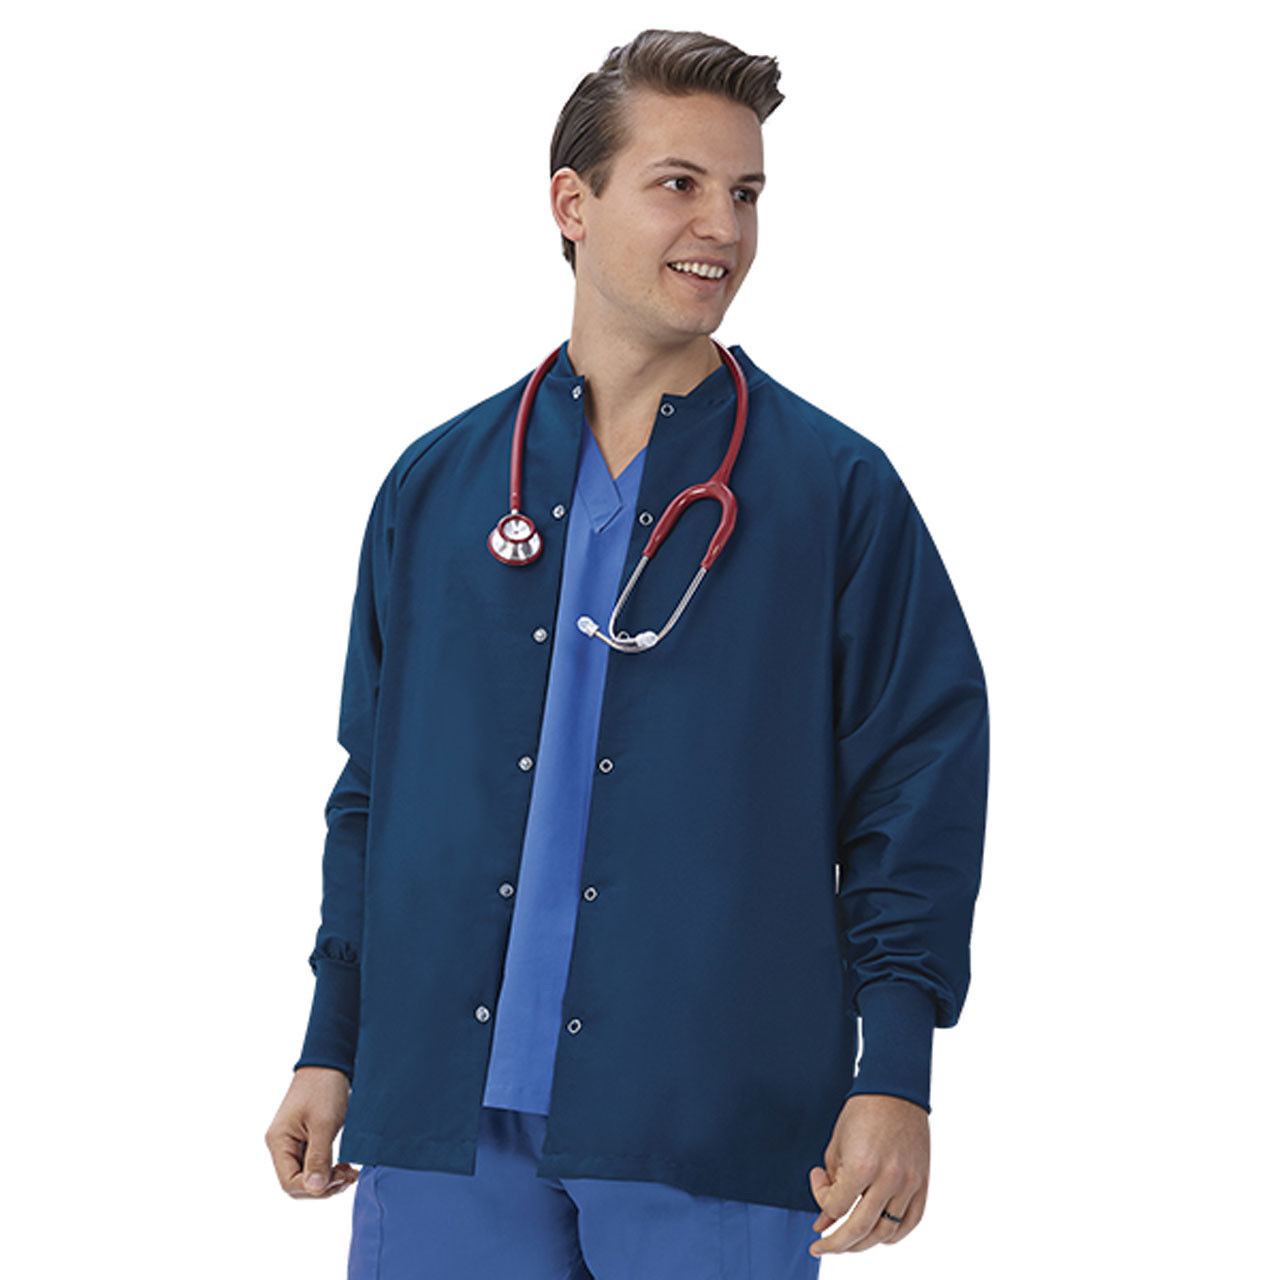 Is this scrub warm up jacket suitable for both men and women?